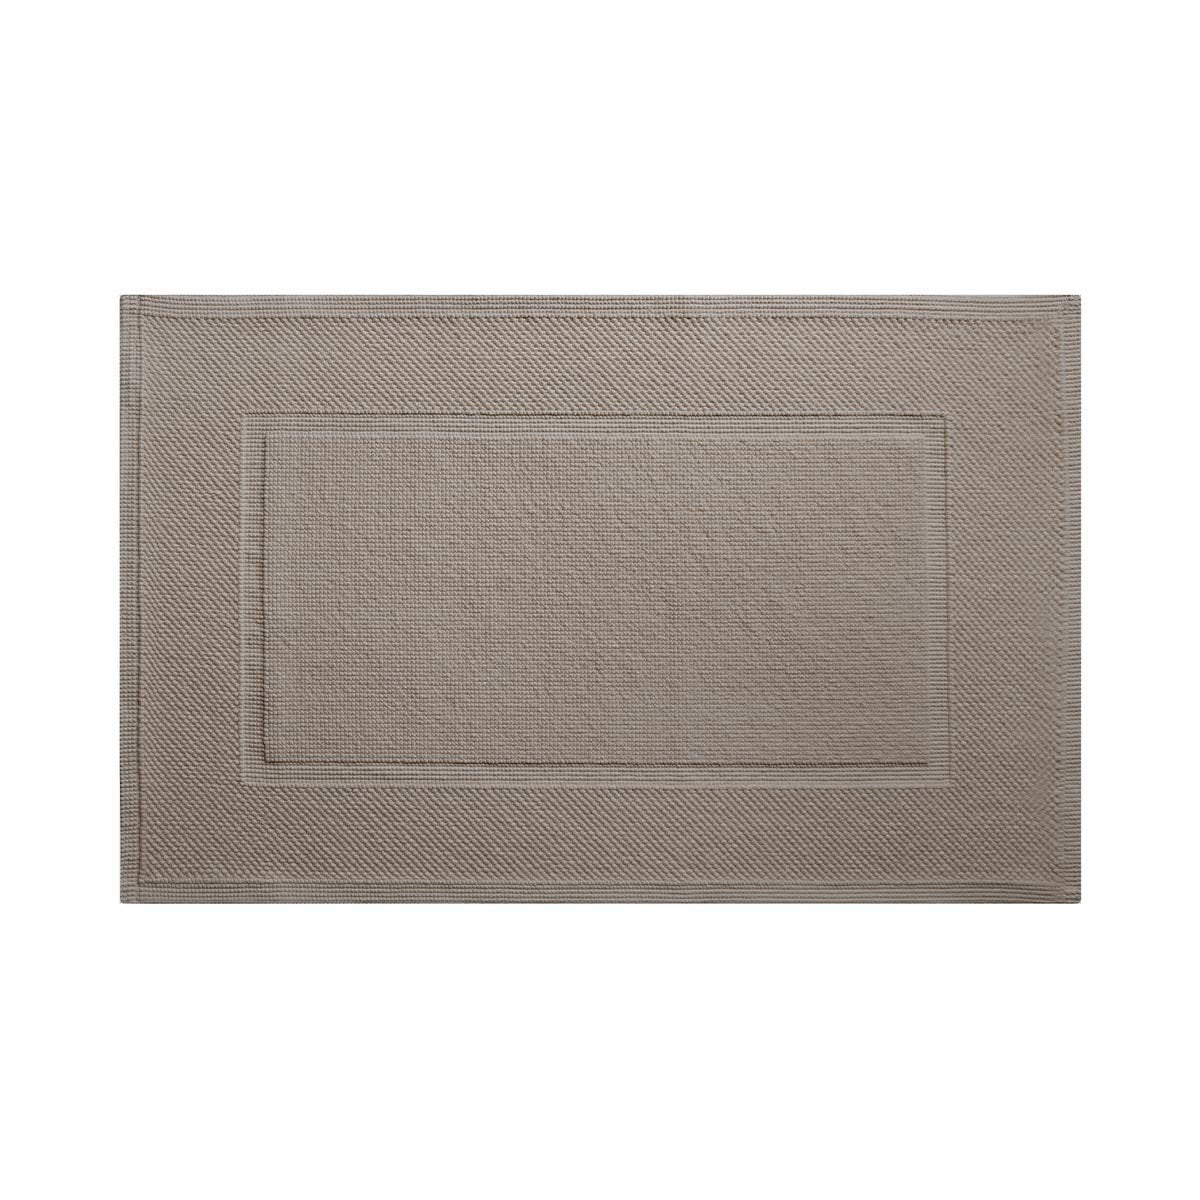 Eden Pierre Bath Mat by Yves Delorme | Fig Linens and Home - Taupe bath mat, rug